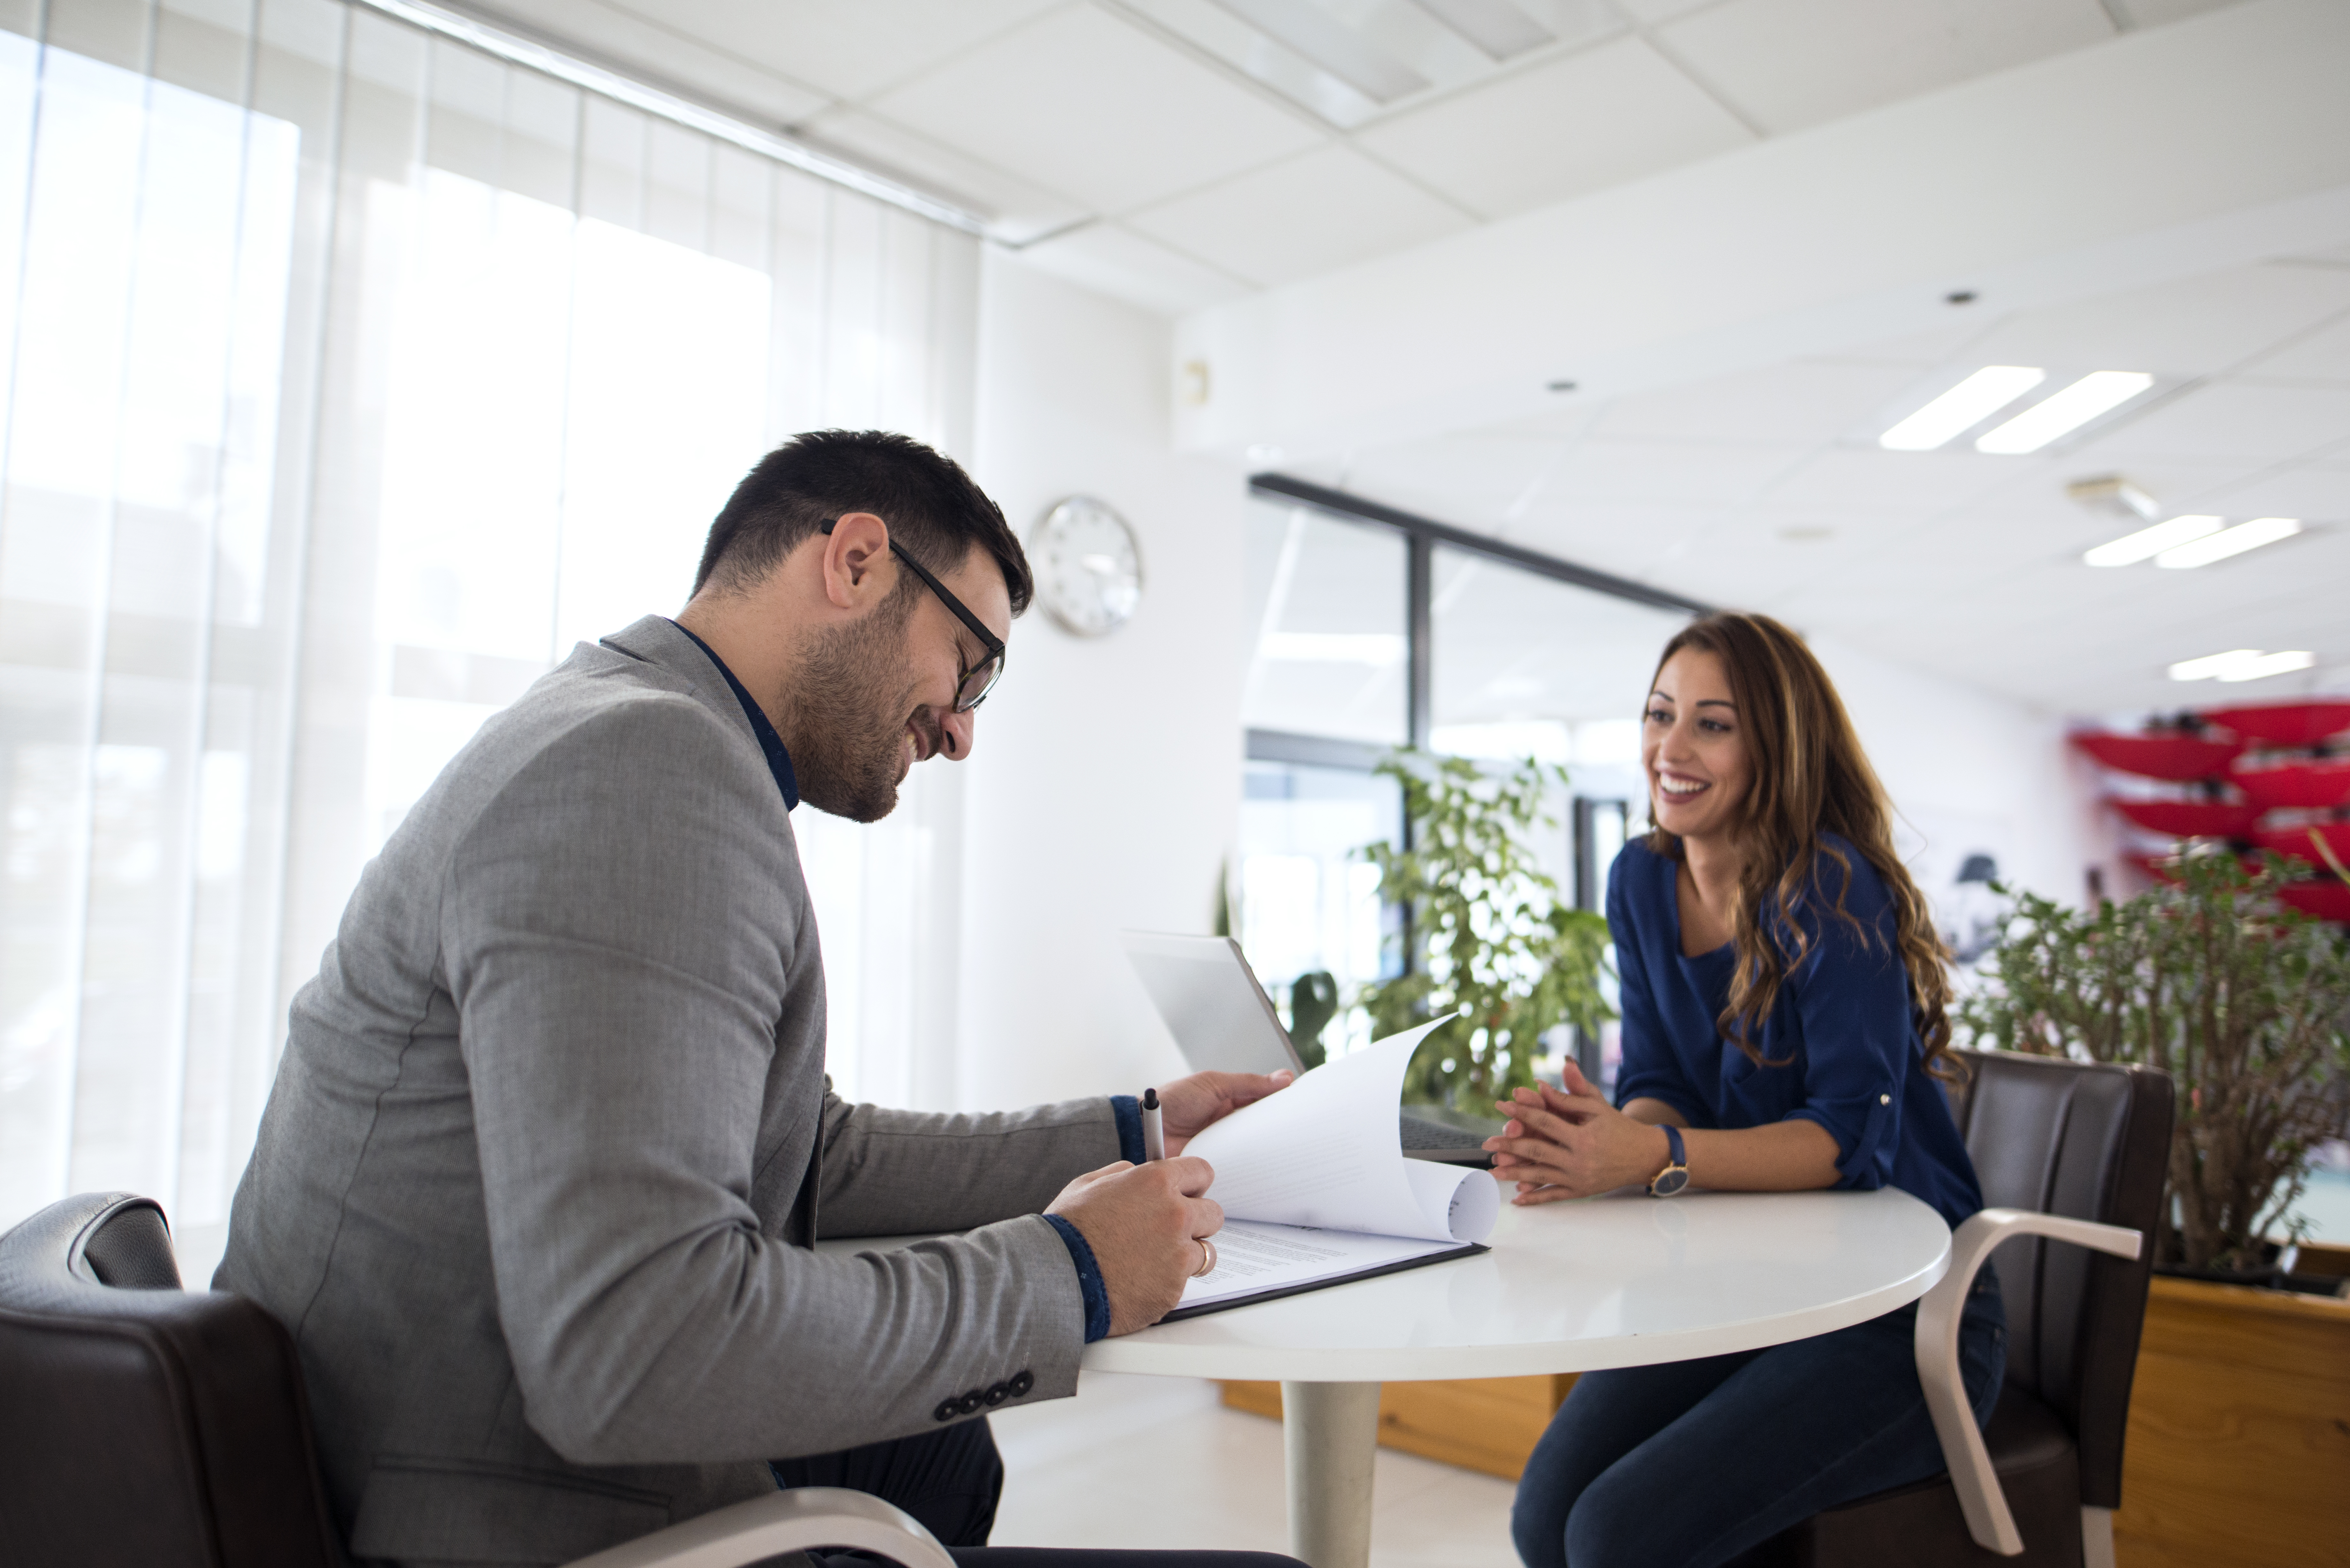 Employer interviewing a candidate